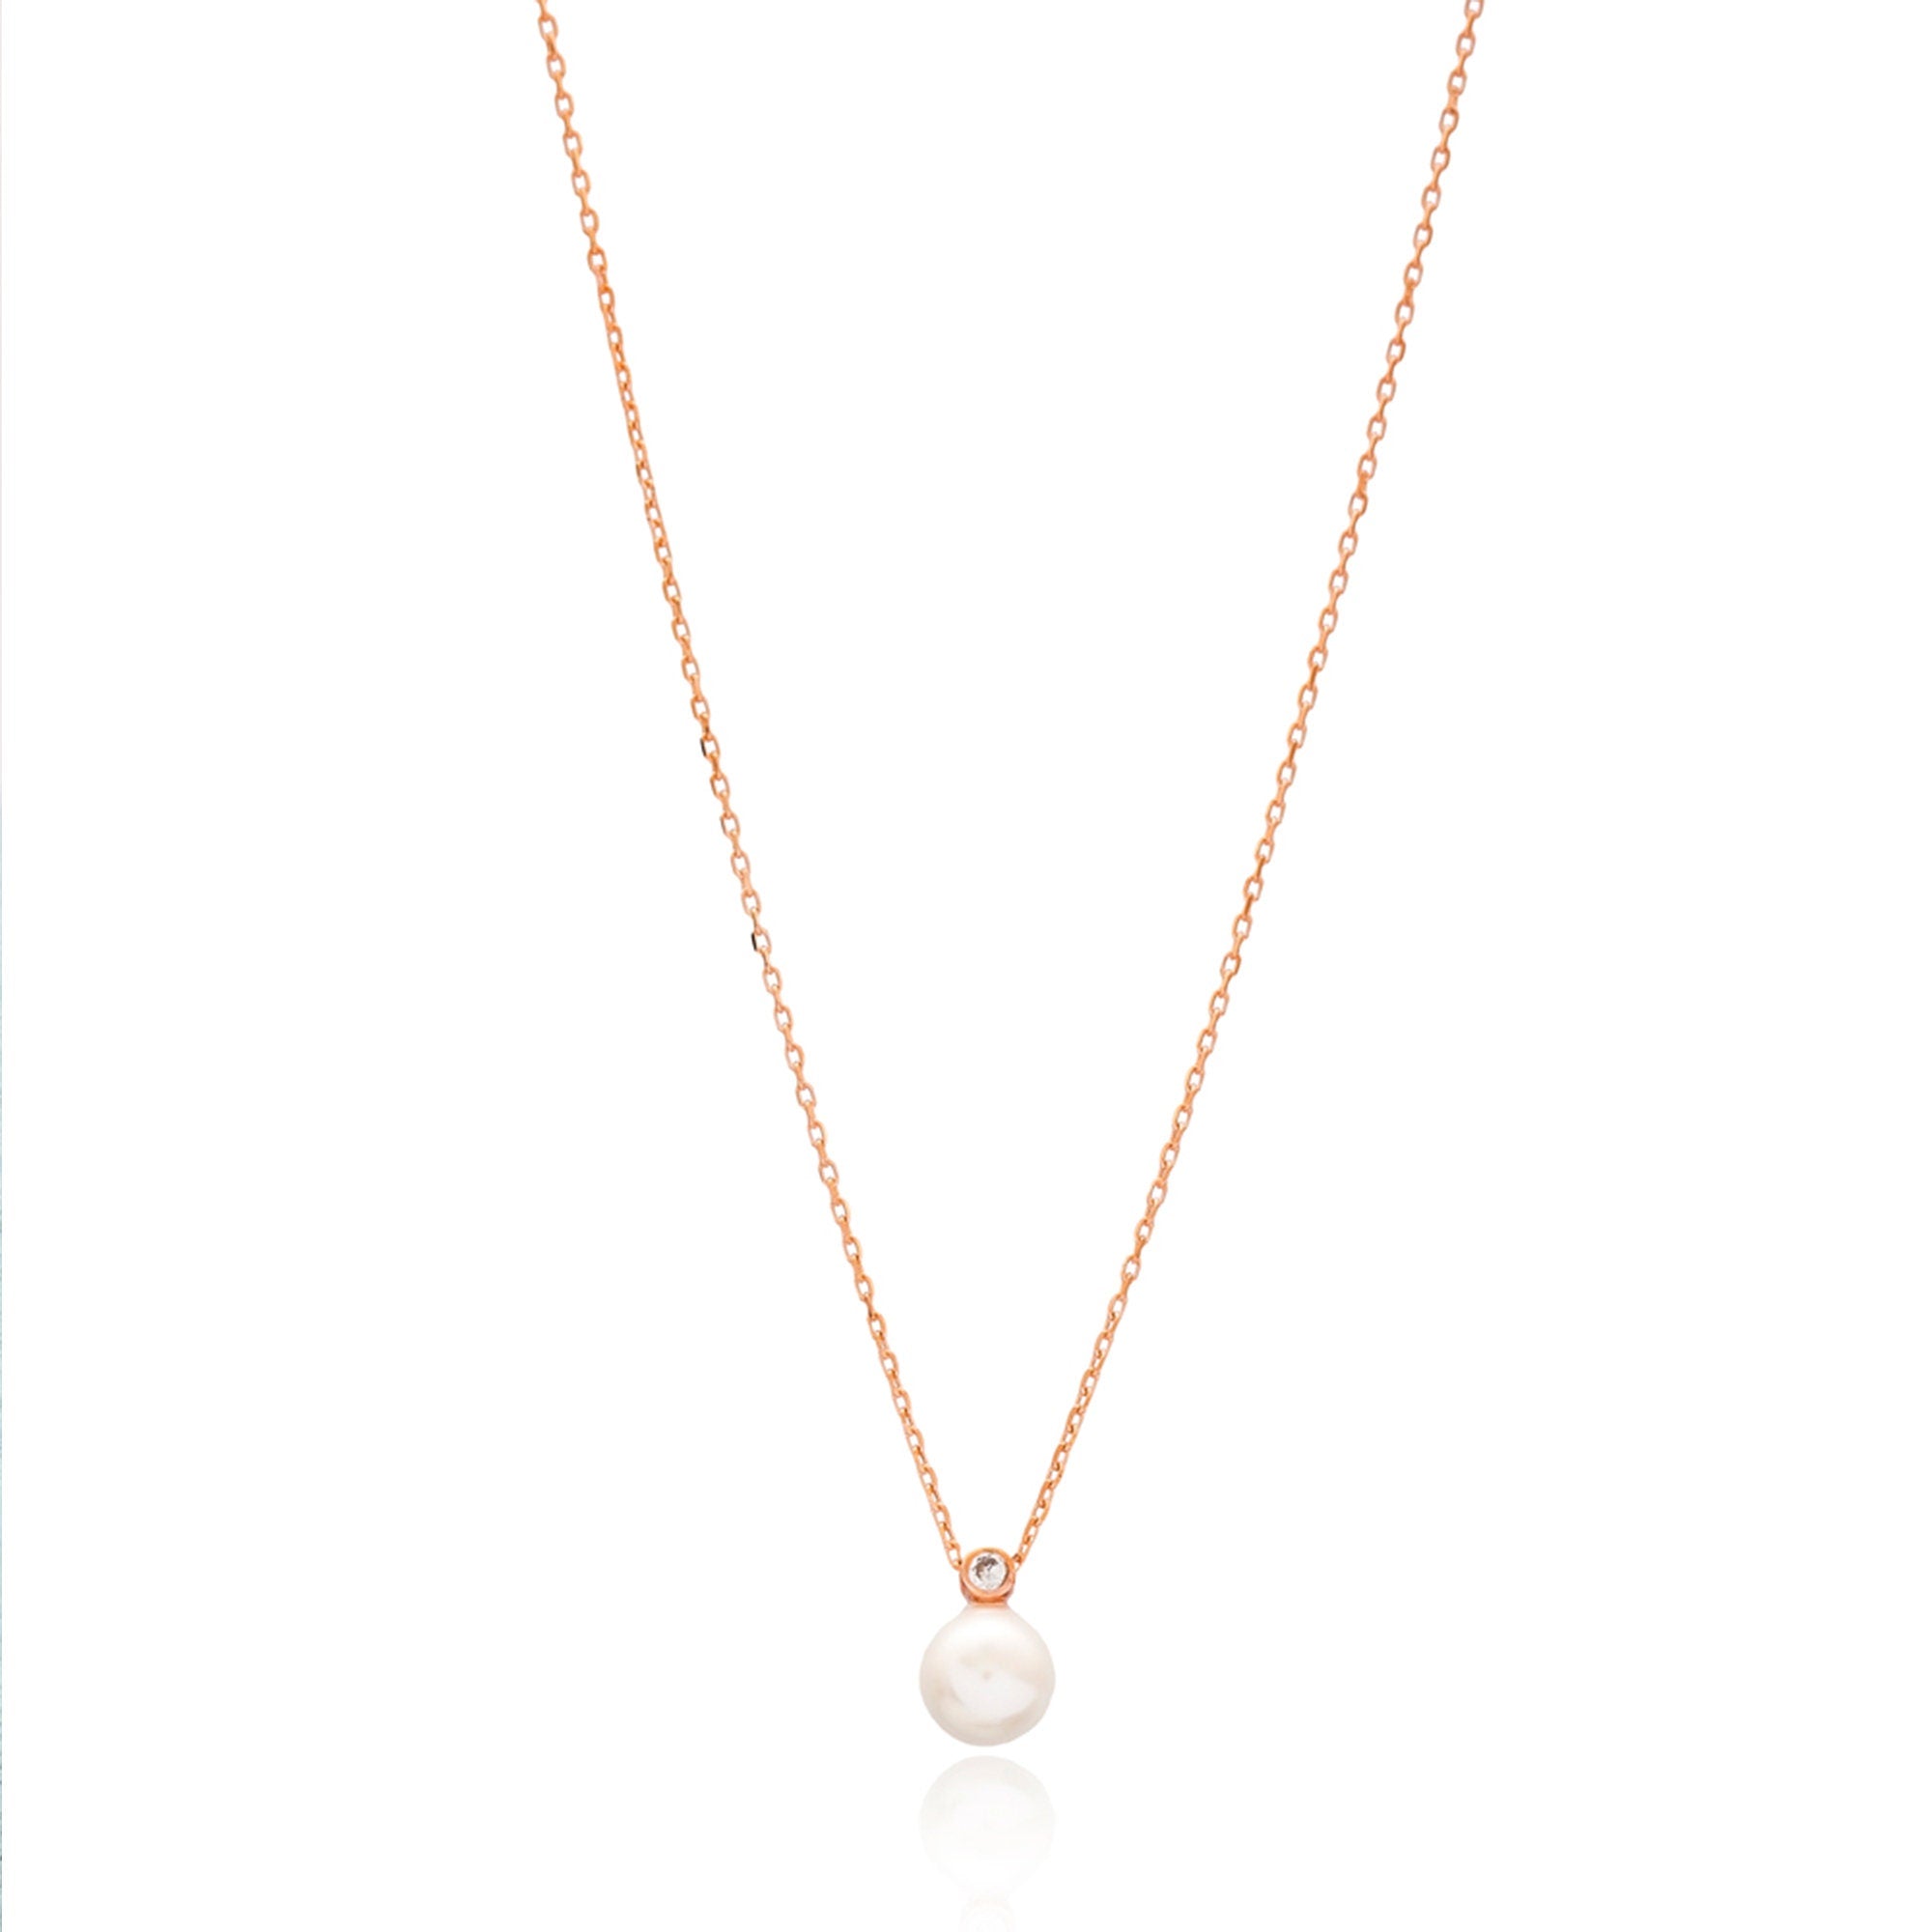 Dainty Ball Necklace with Cubic Zirconia Stone - 925 Sterling Silver